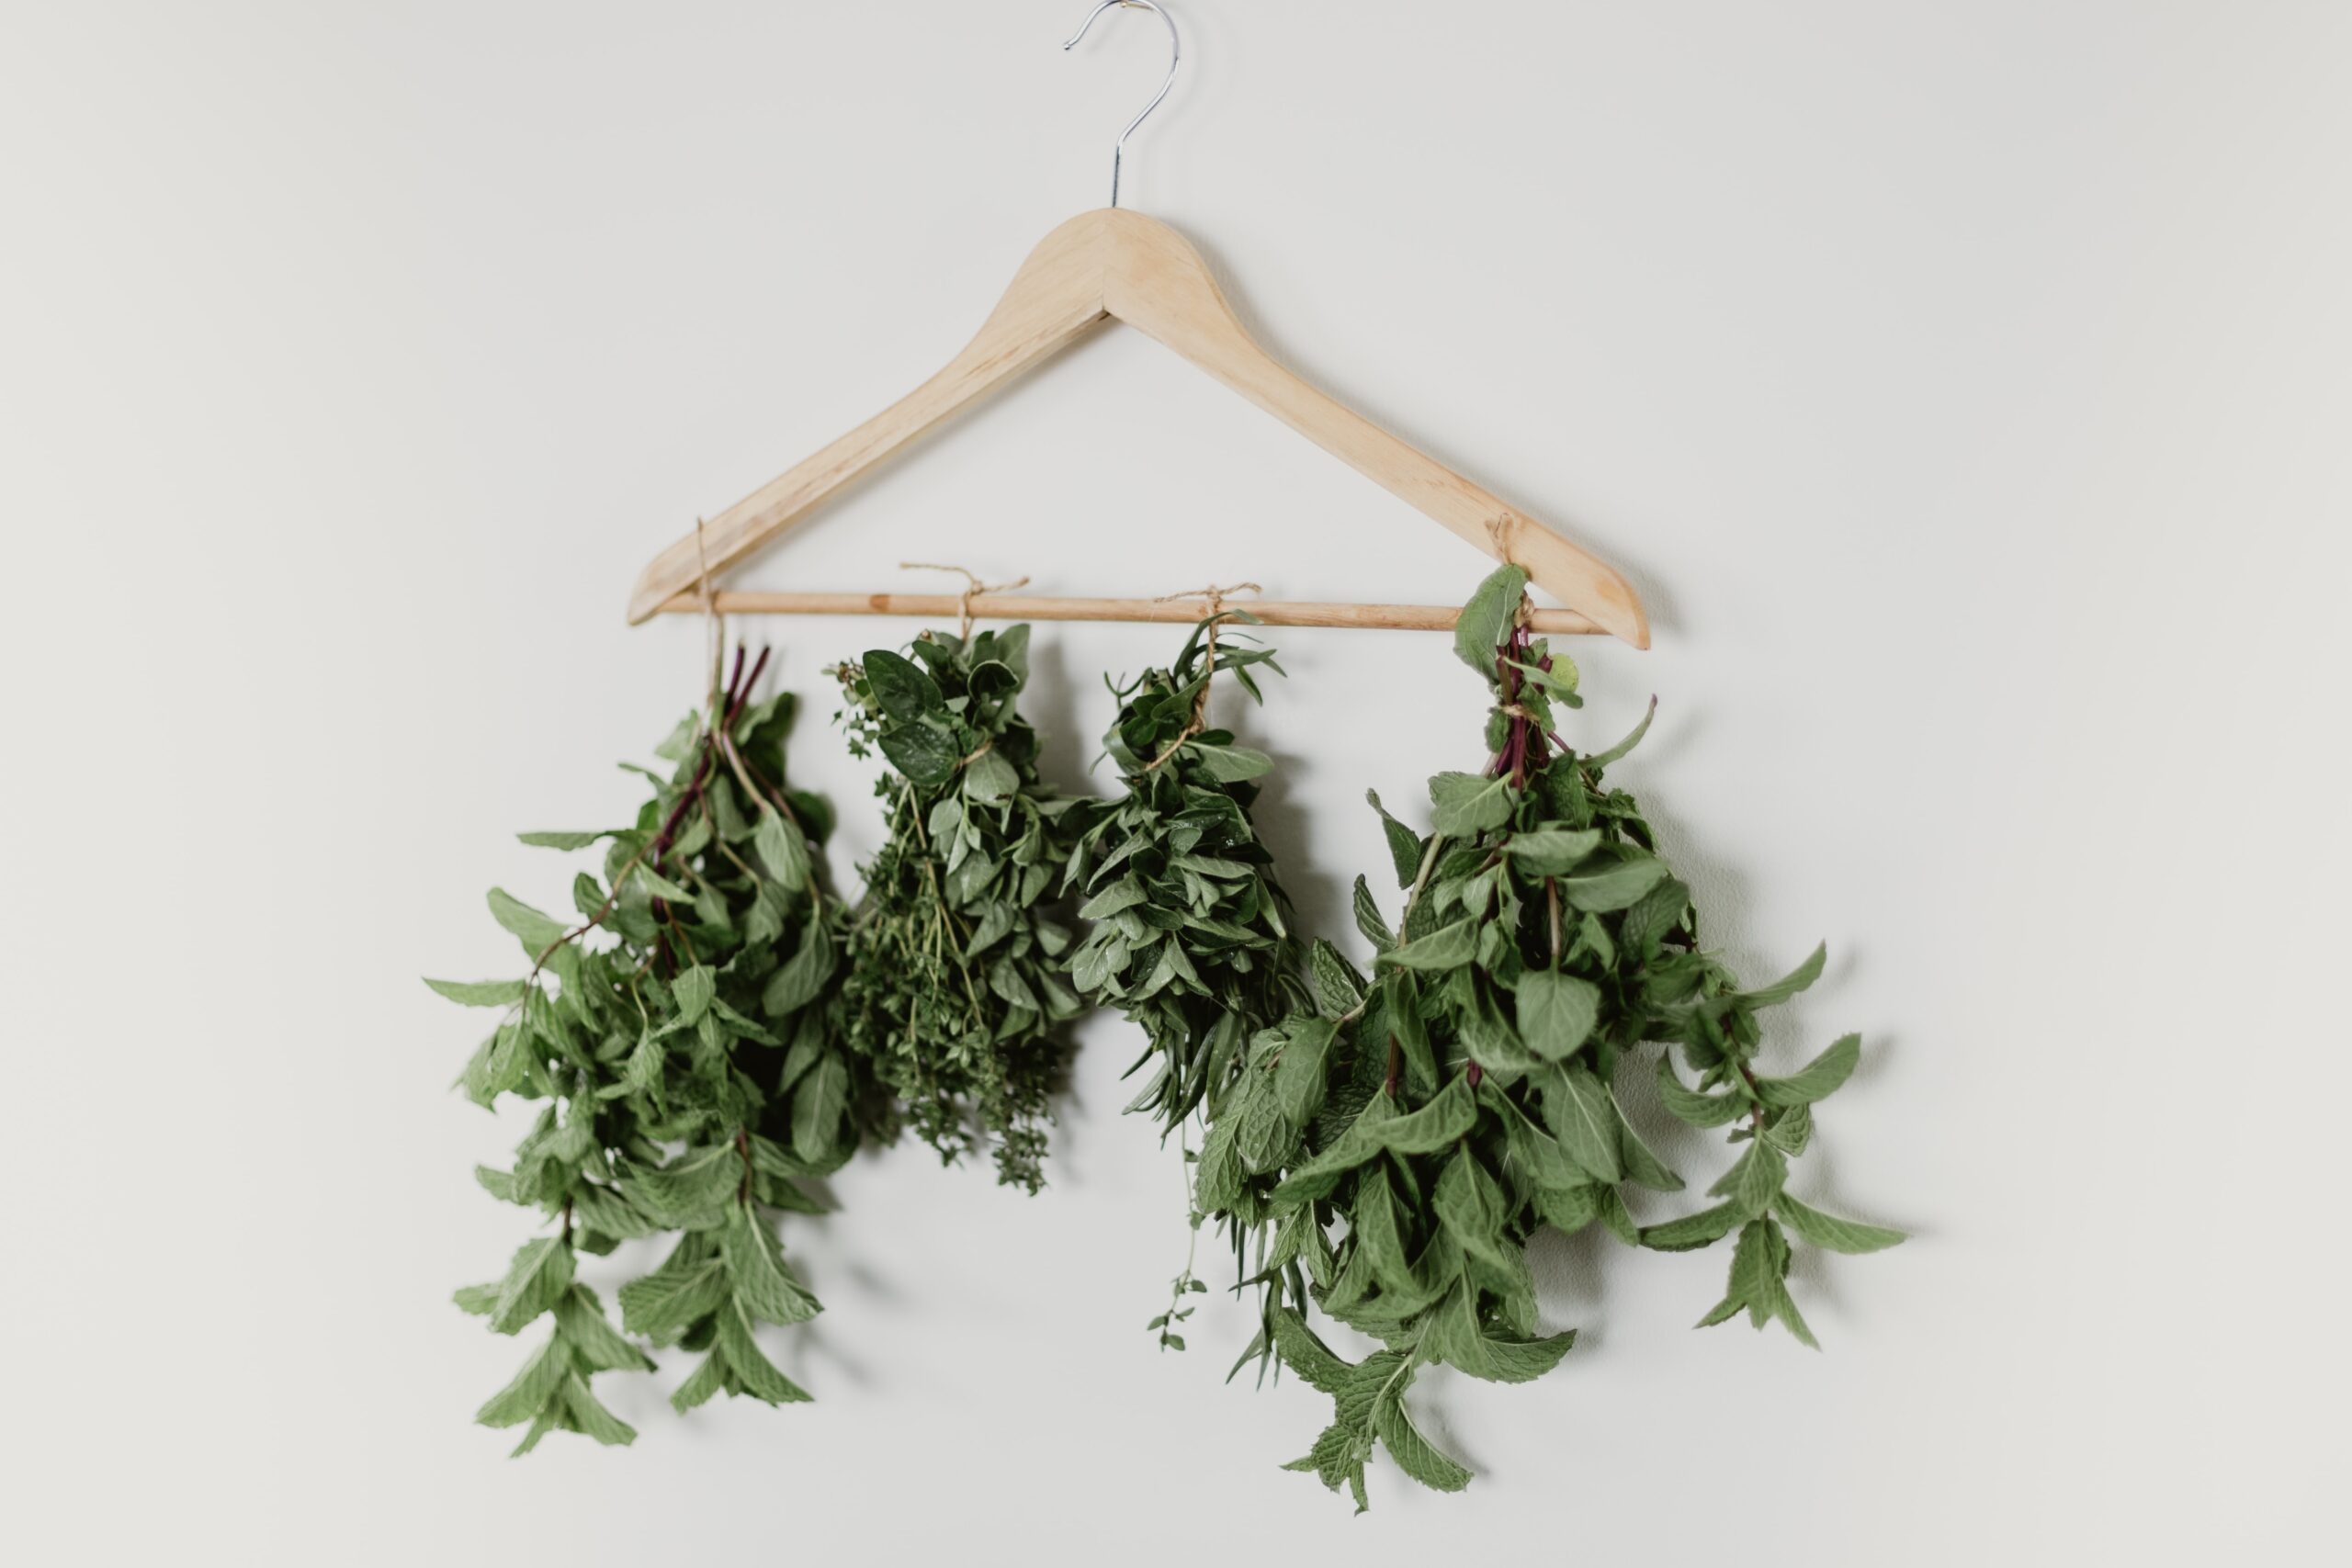 drying herbs from a clothes hanger